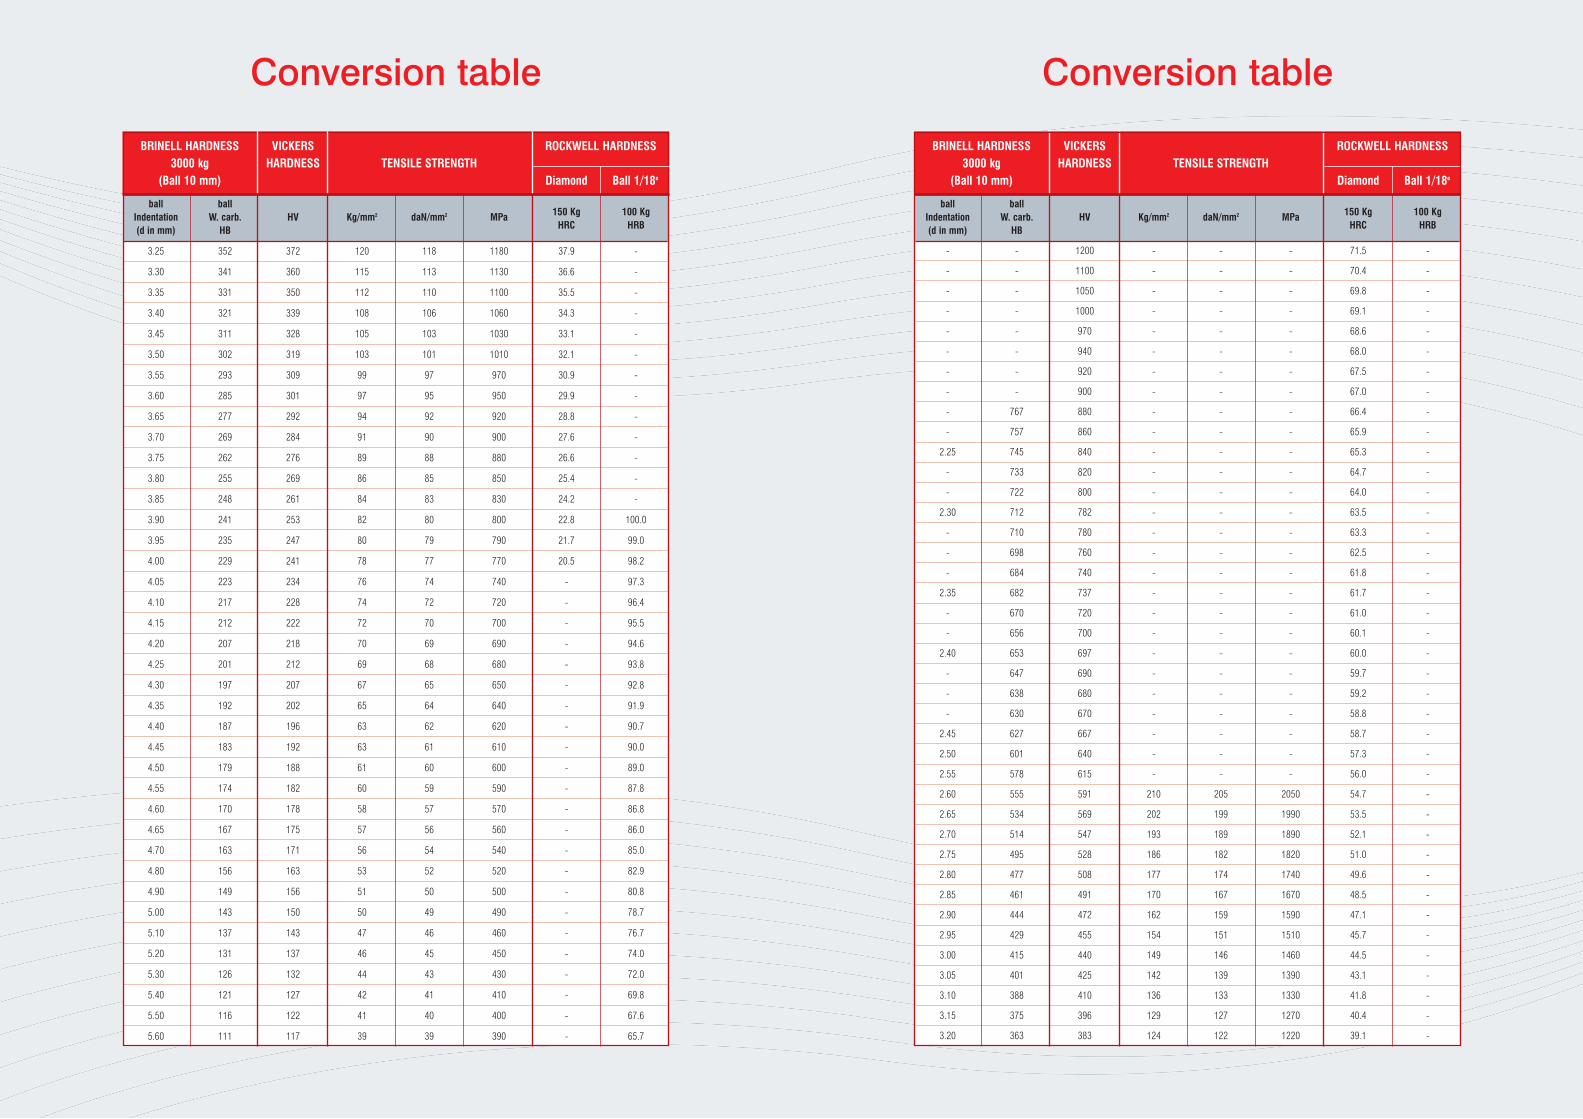 pdf-conversion-table-aubert-duval-brinell-hardness-vickers-rockwell-hardness-3000-kg